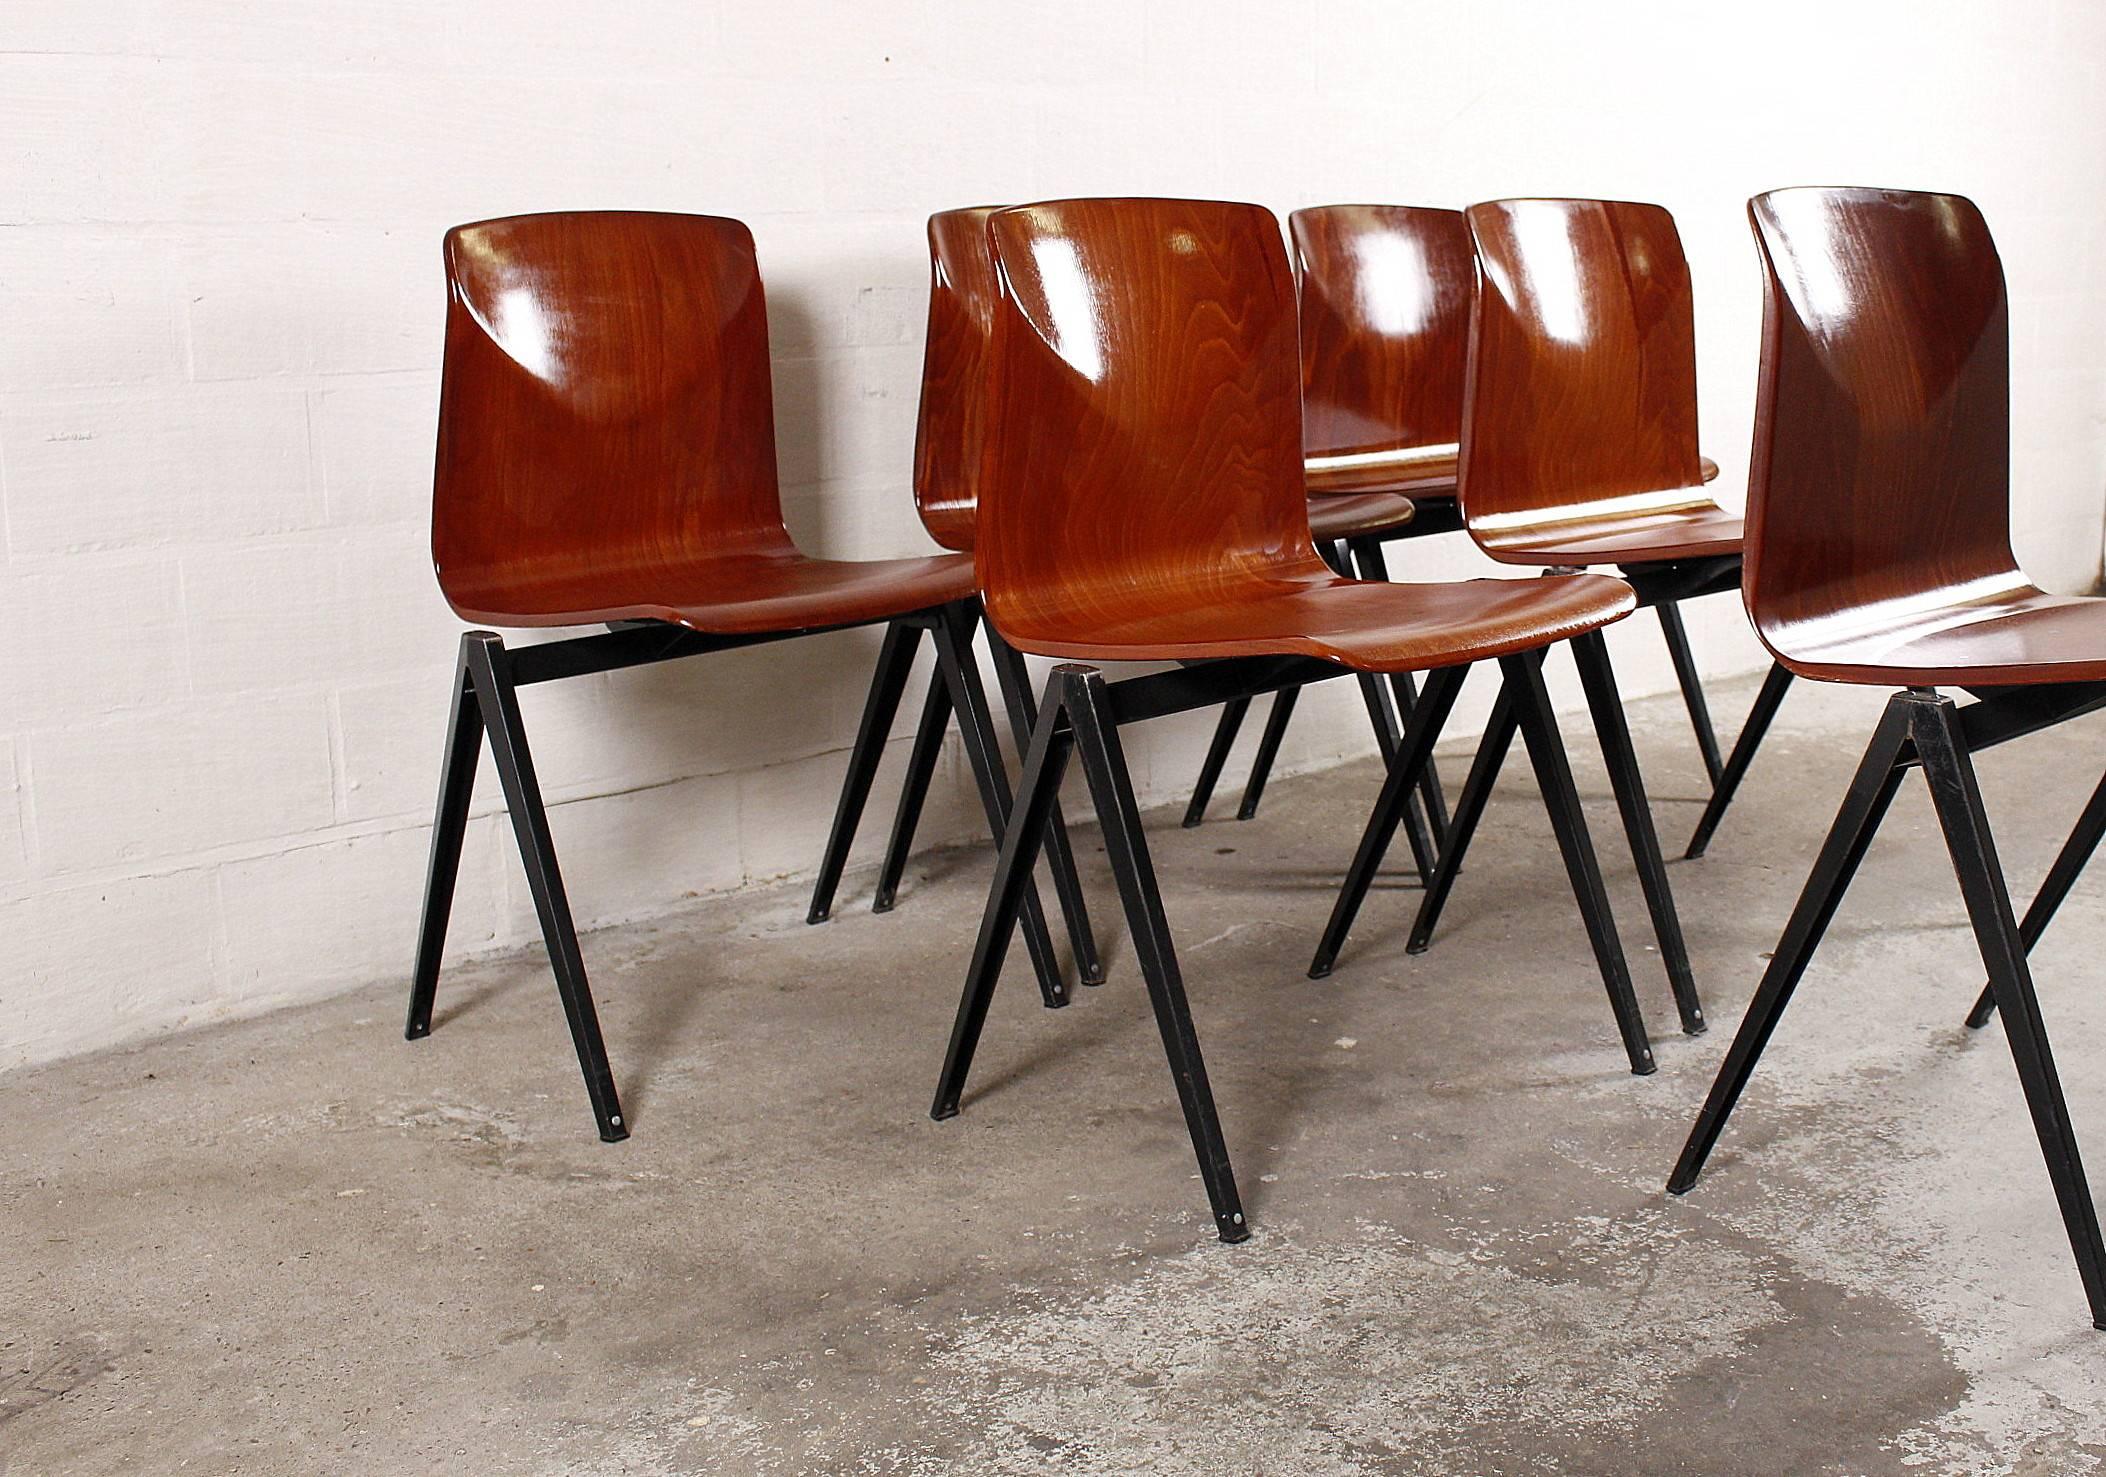 Set of six pagwood chairs with plywood seats veneered in rosewood. The frame is made from black lacquered metal.